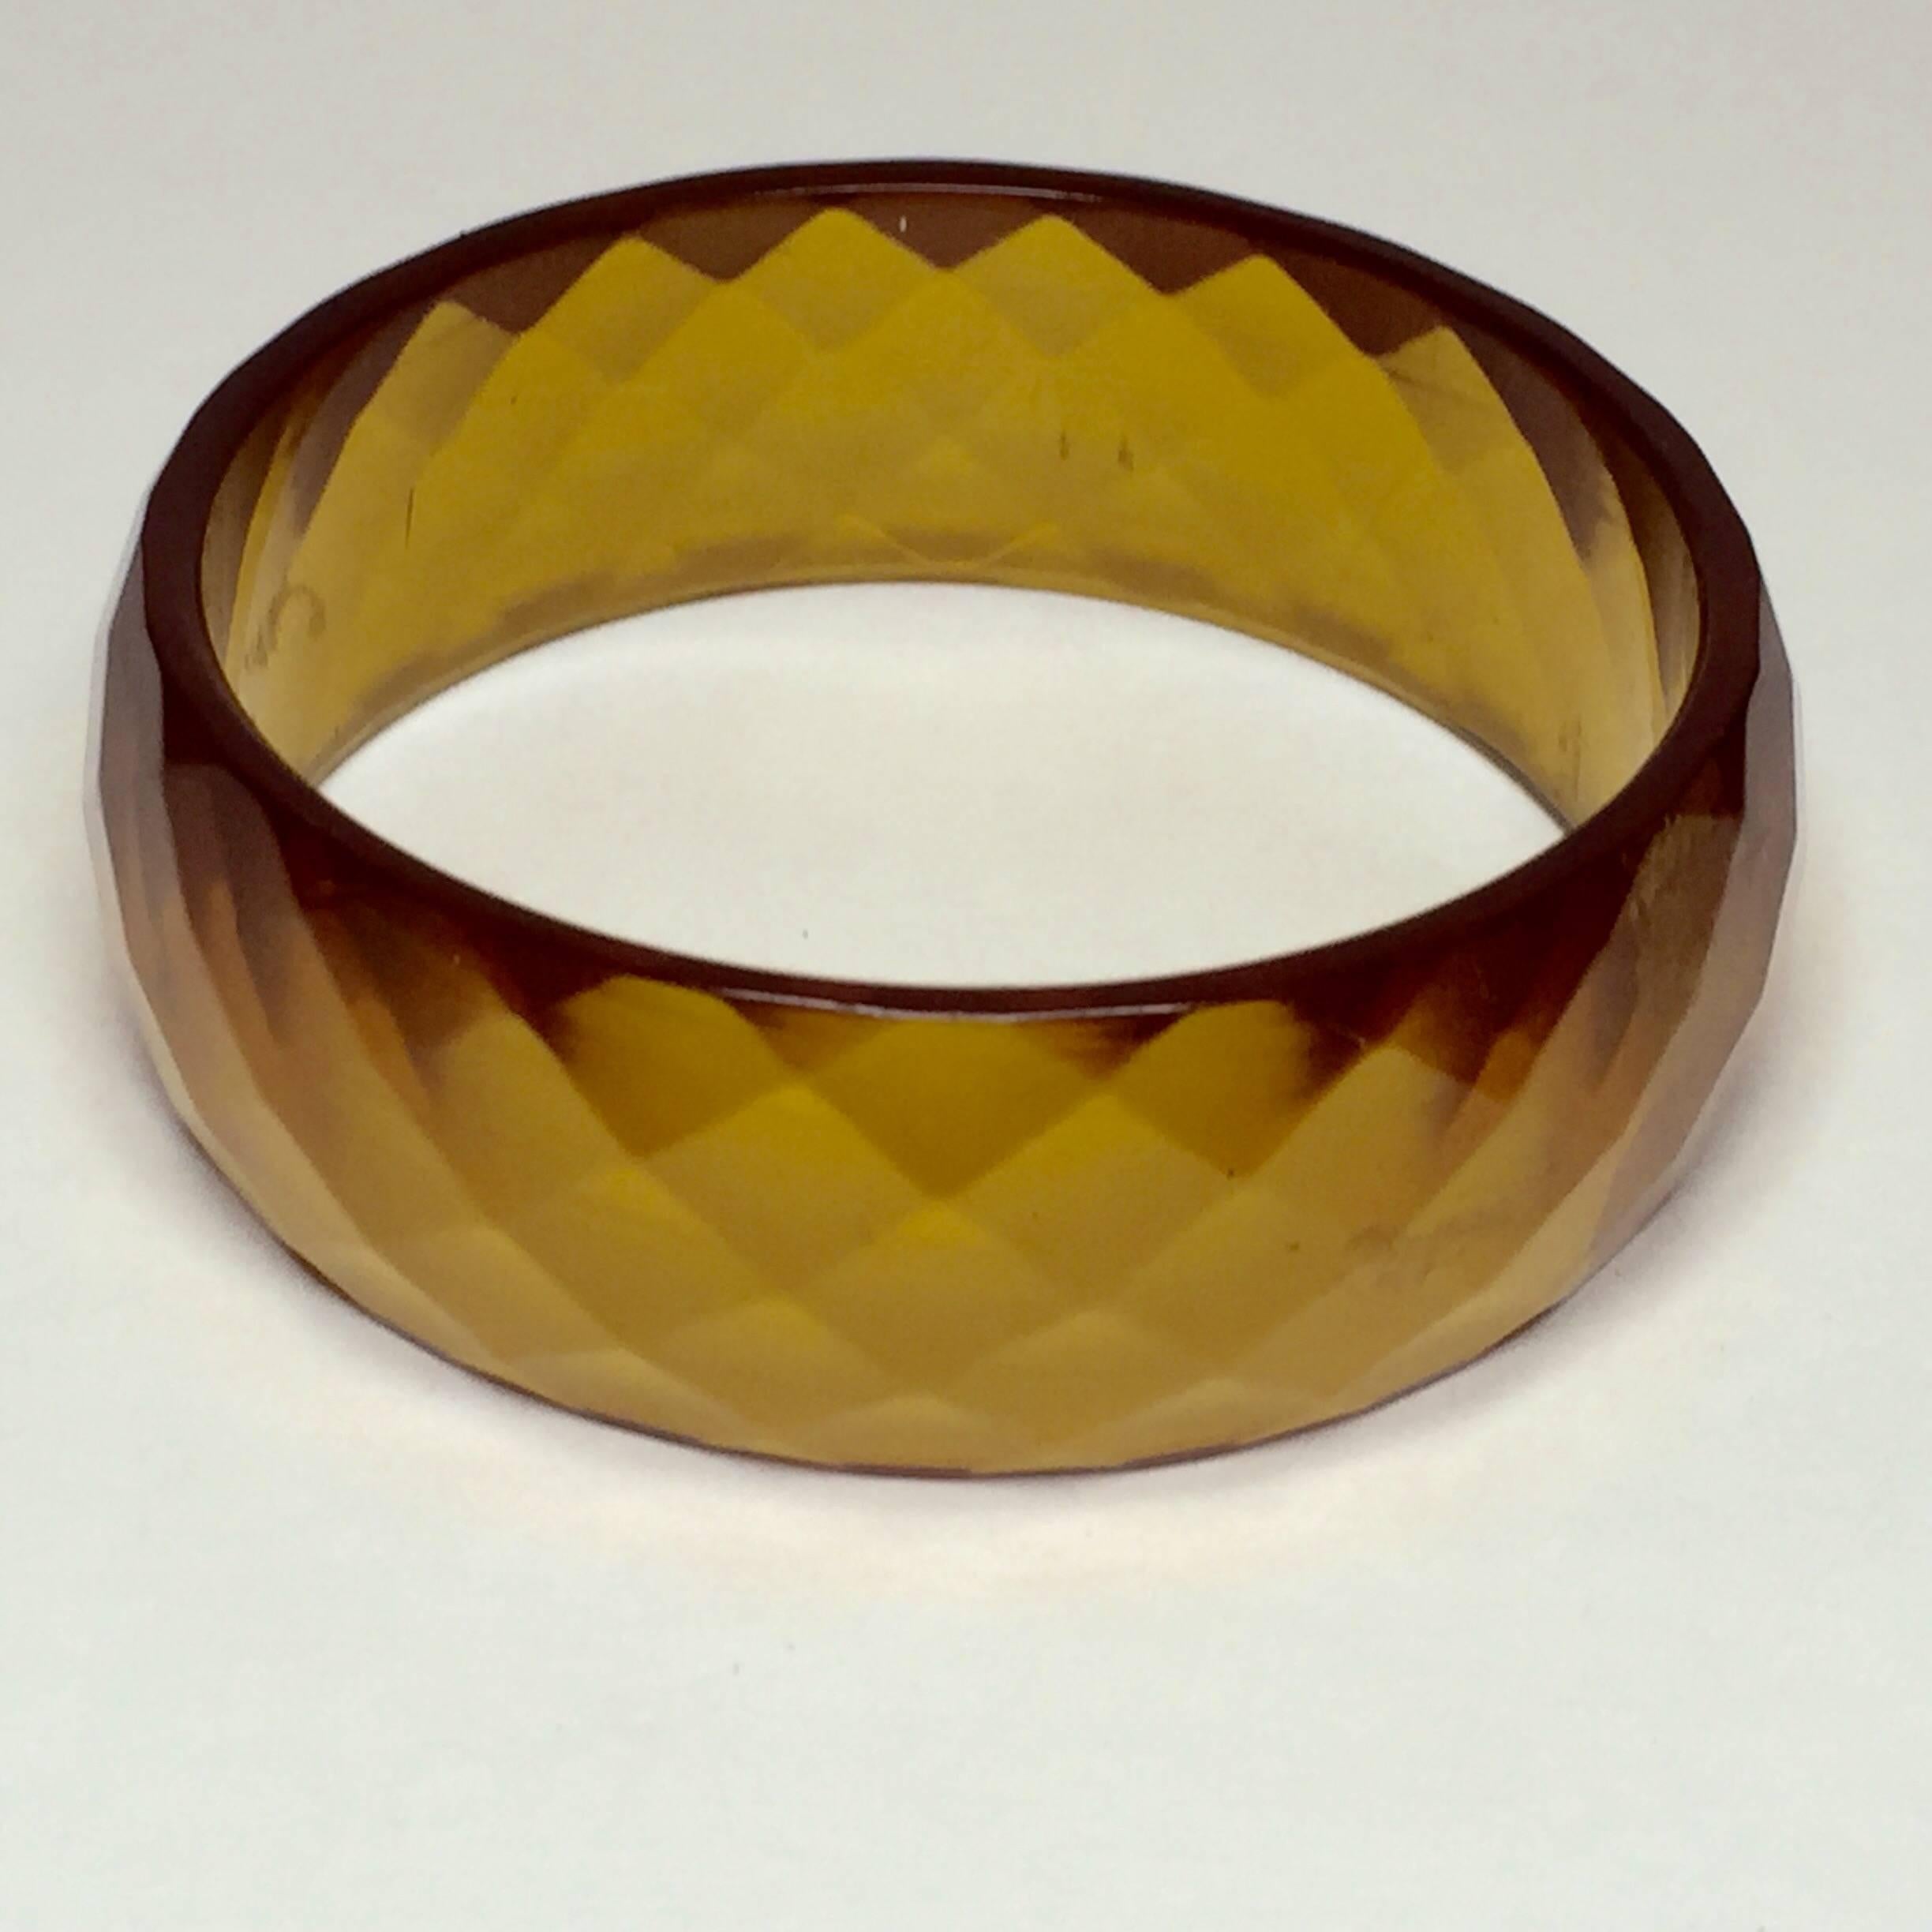 A triad of three allied yet contrasty 1930's bakelite bangles in lusciously translucent apple juice bakelite, includes all 3 THREE bangles pictured in the group, individually, as well as in close up view. The star is of course the 3/4 